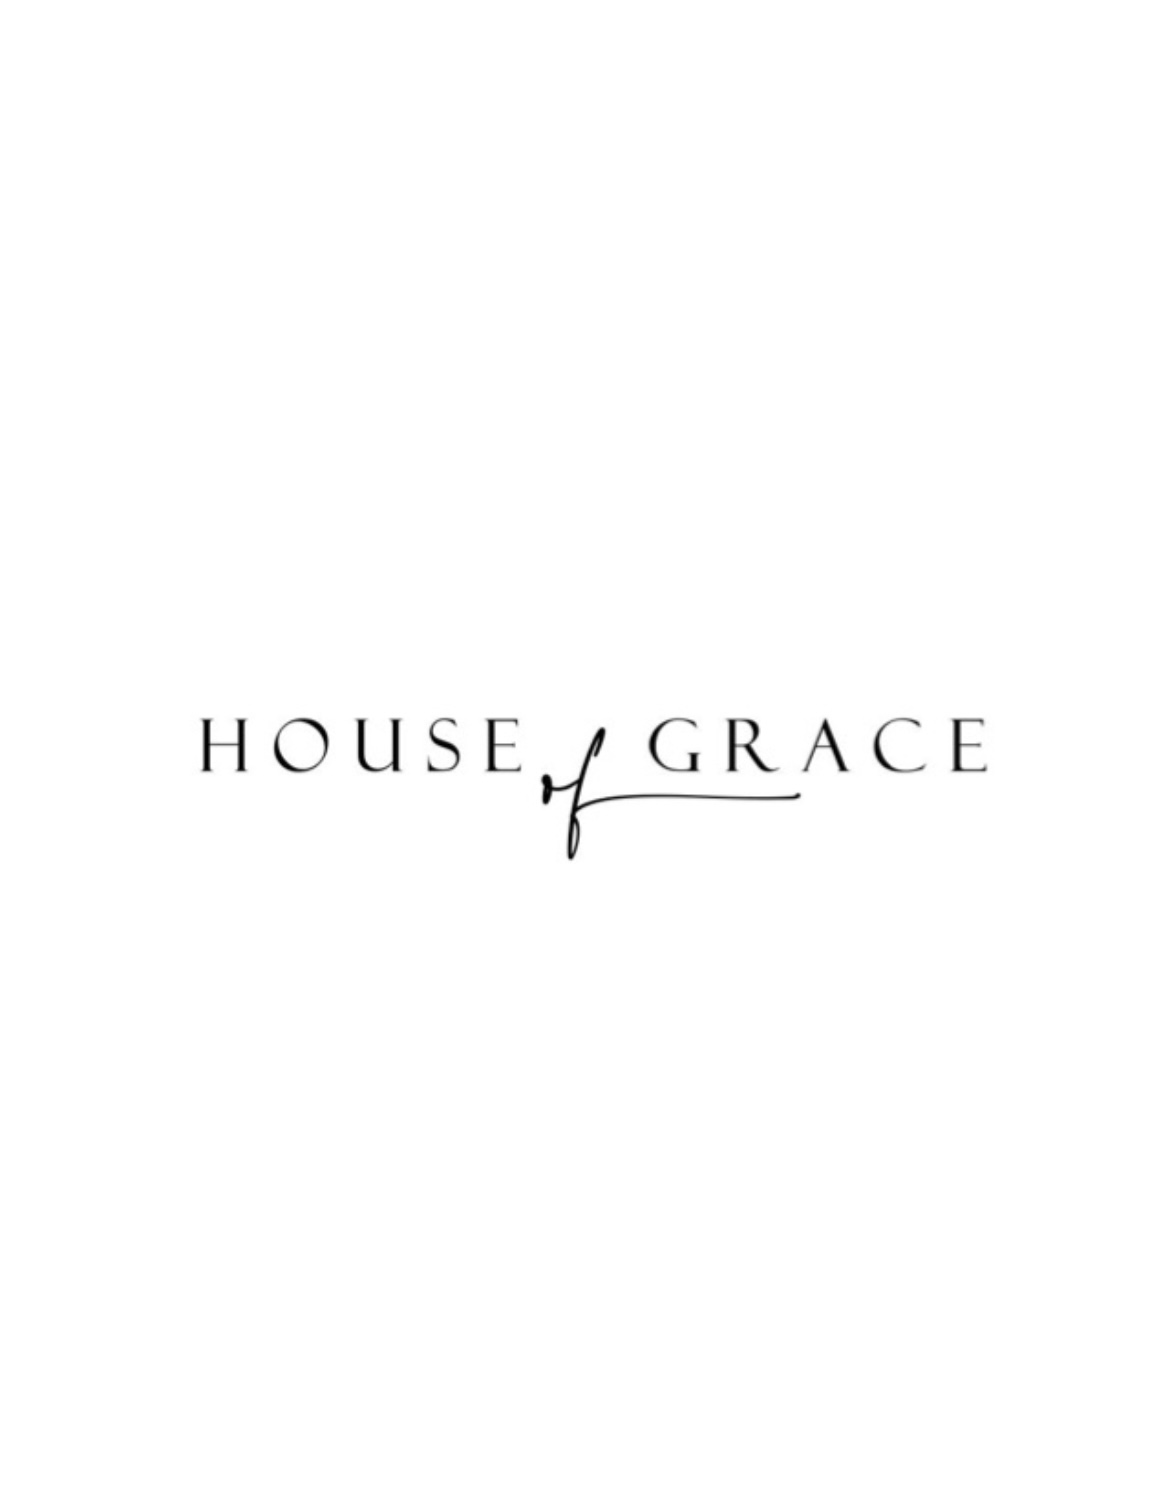 House of grace